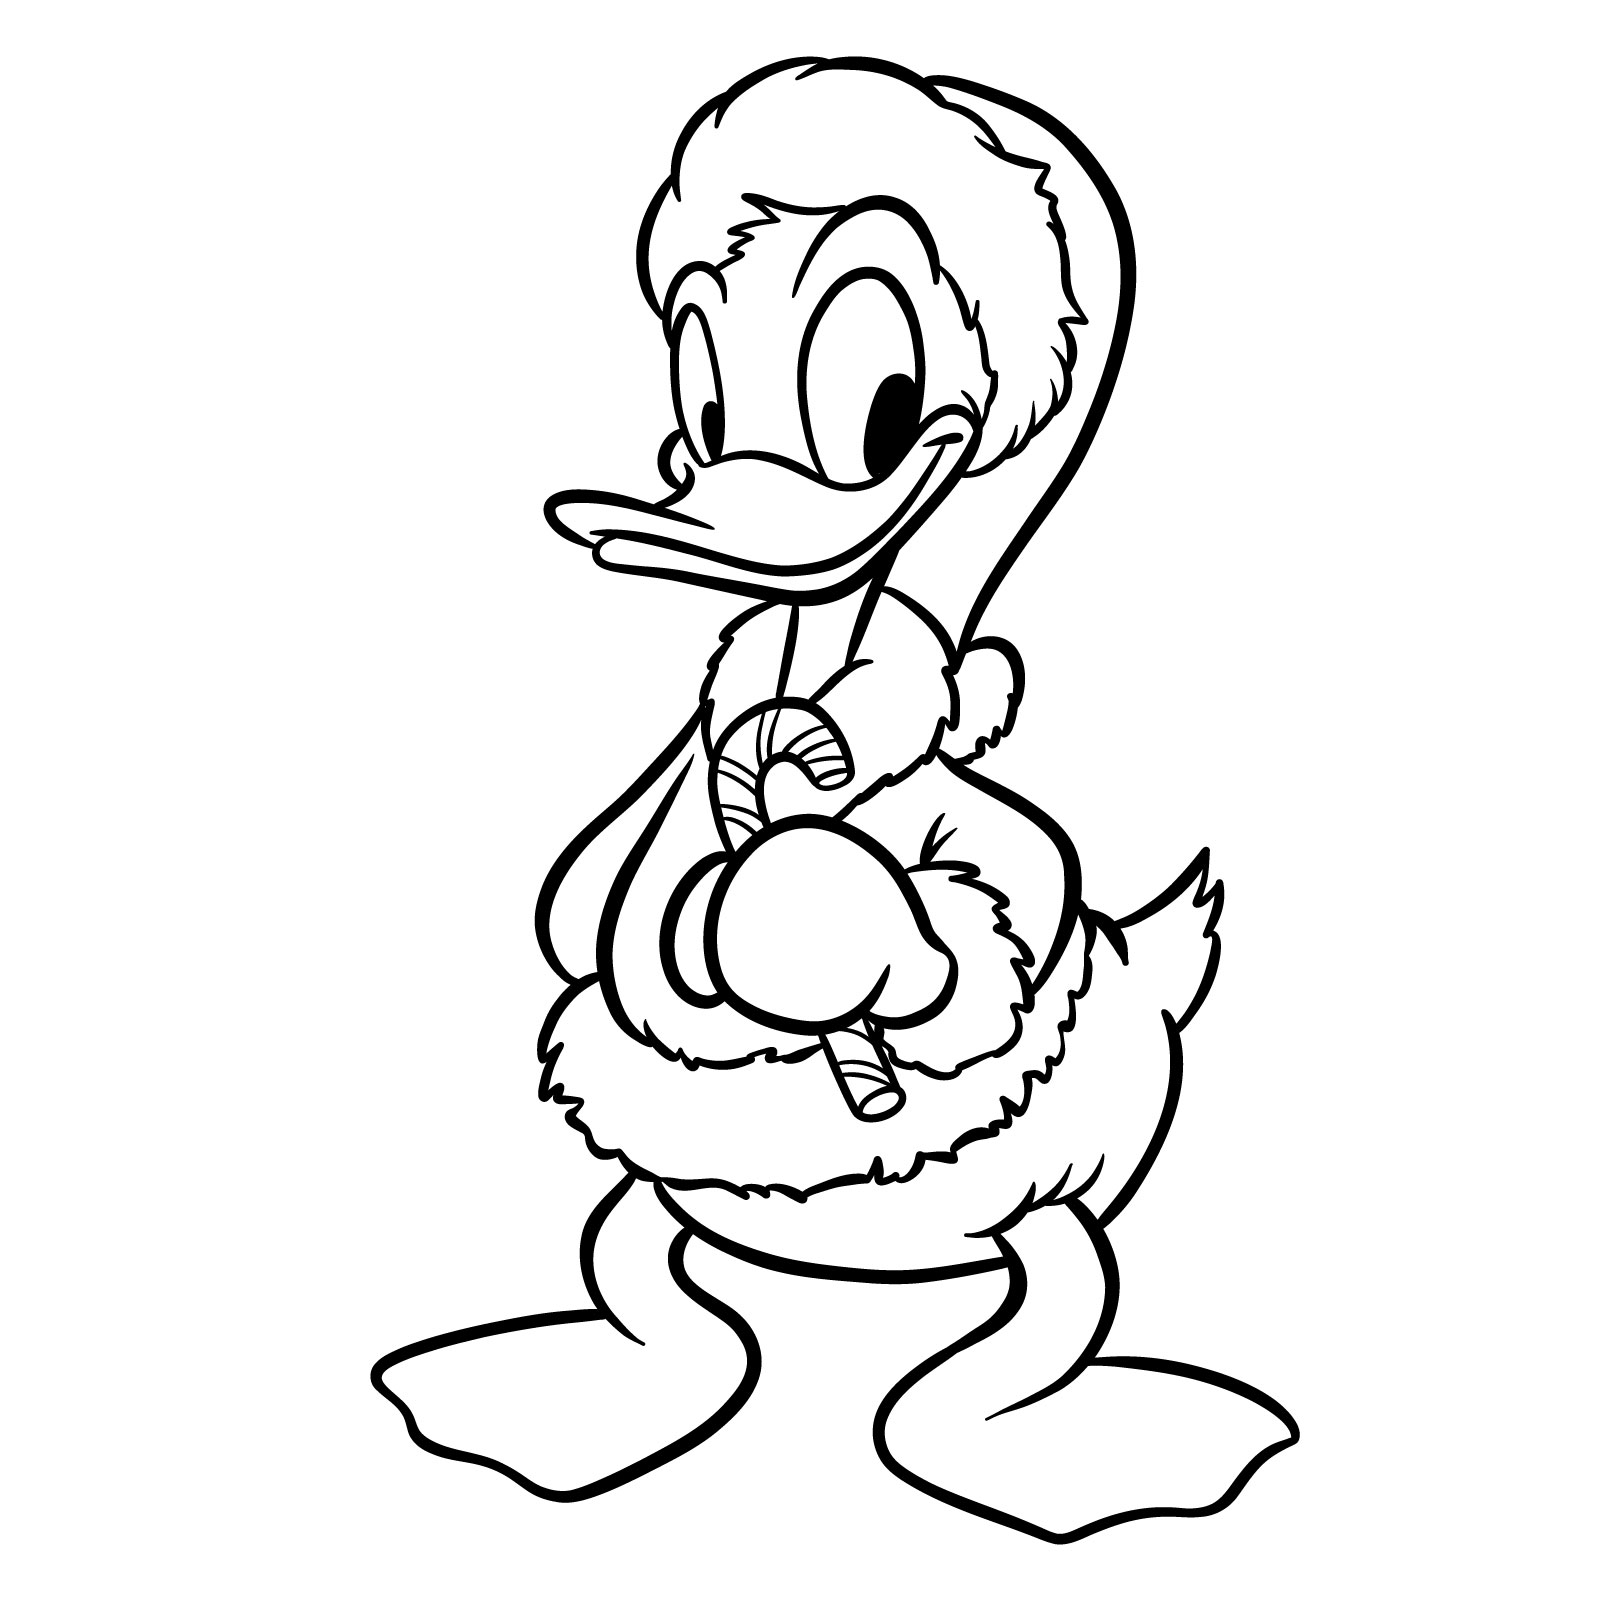 How to Draw Christmas Donald Duck - final step